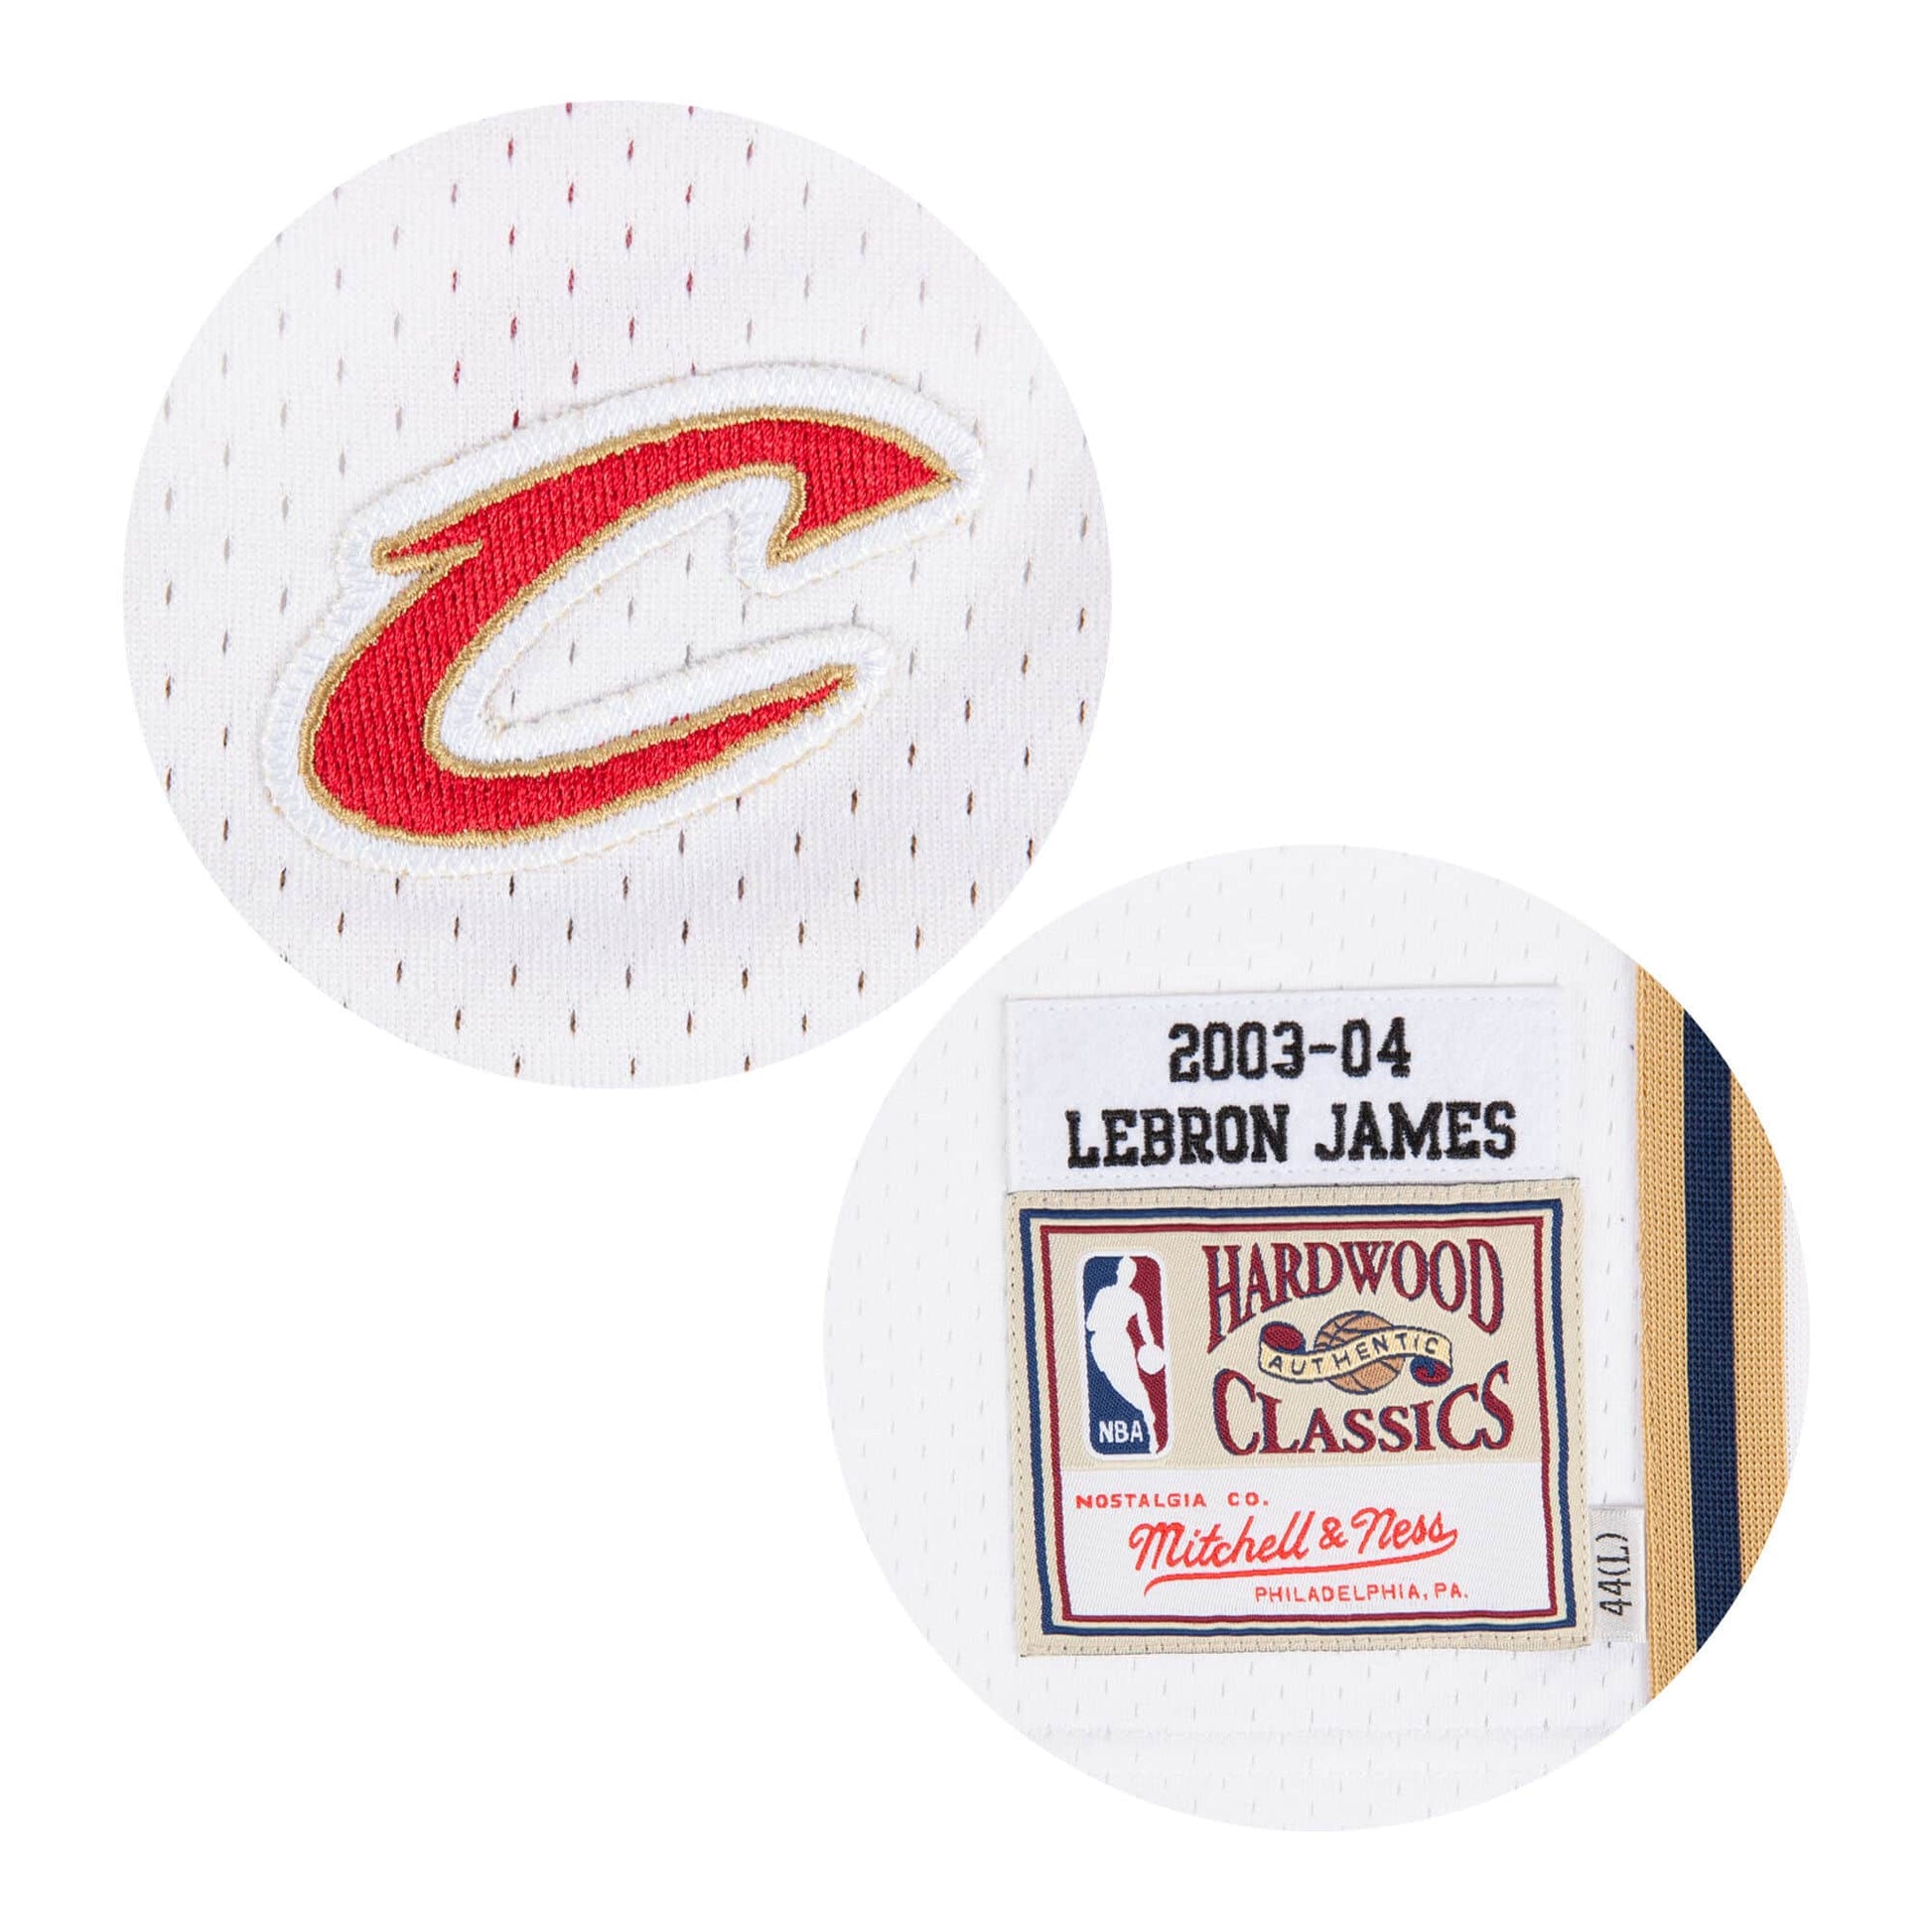 Lebron James- Cleveland Cavaliers Throwback Jersey – Kiwi Jersey Co.